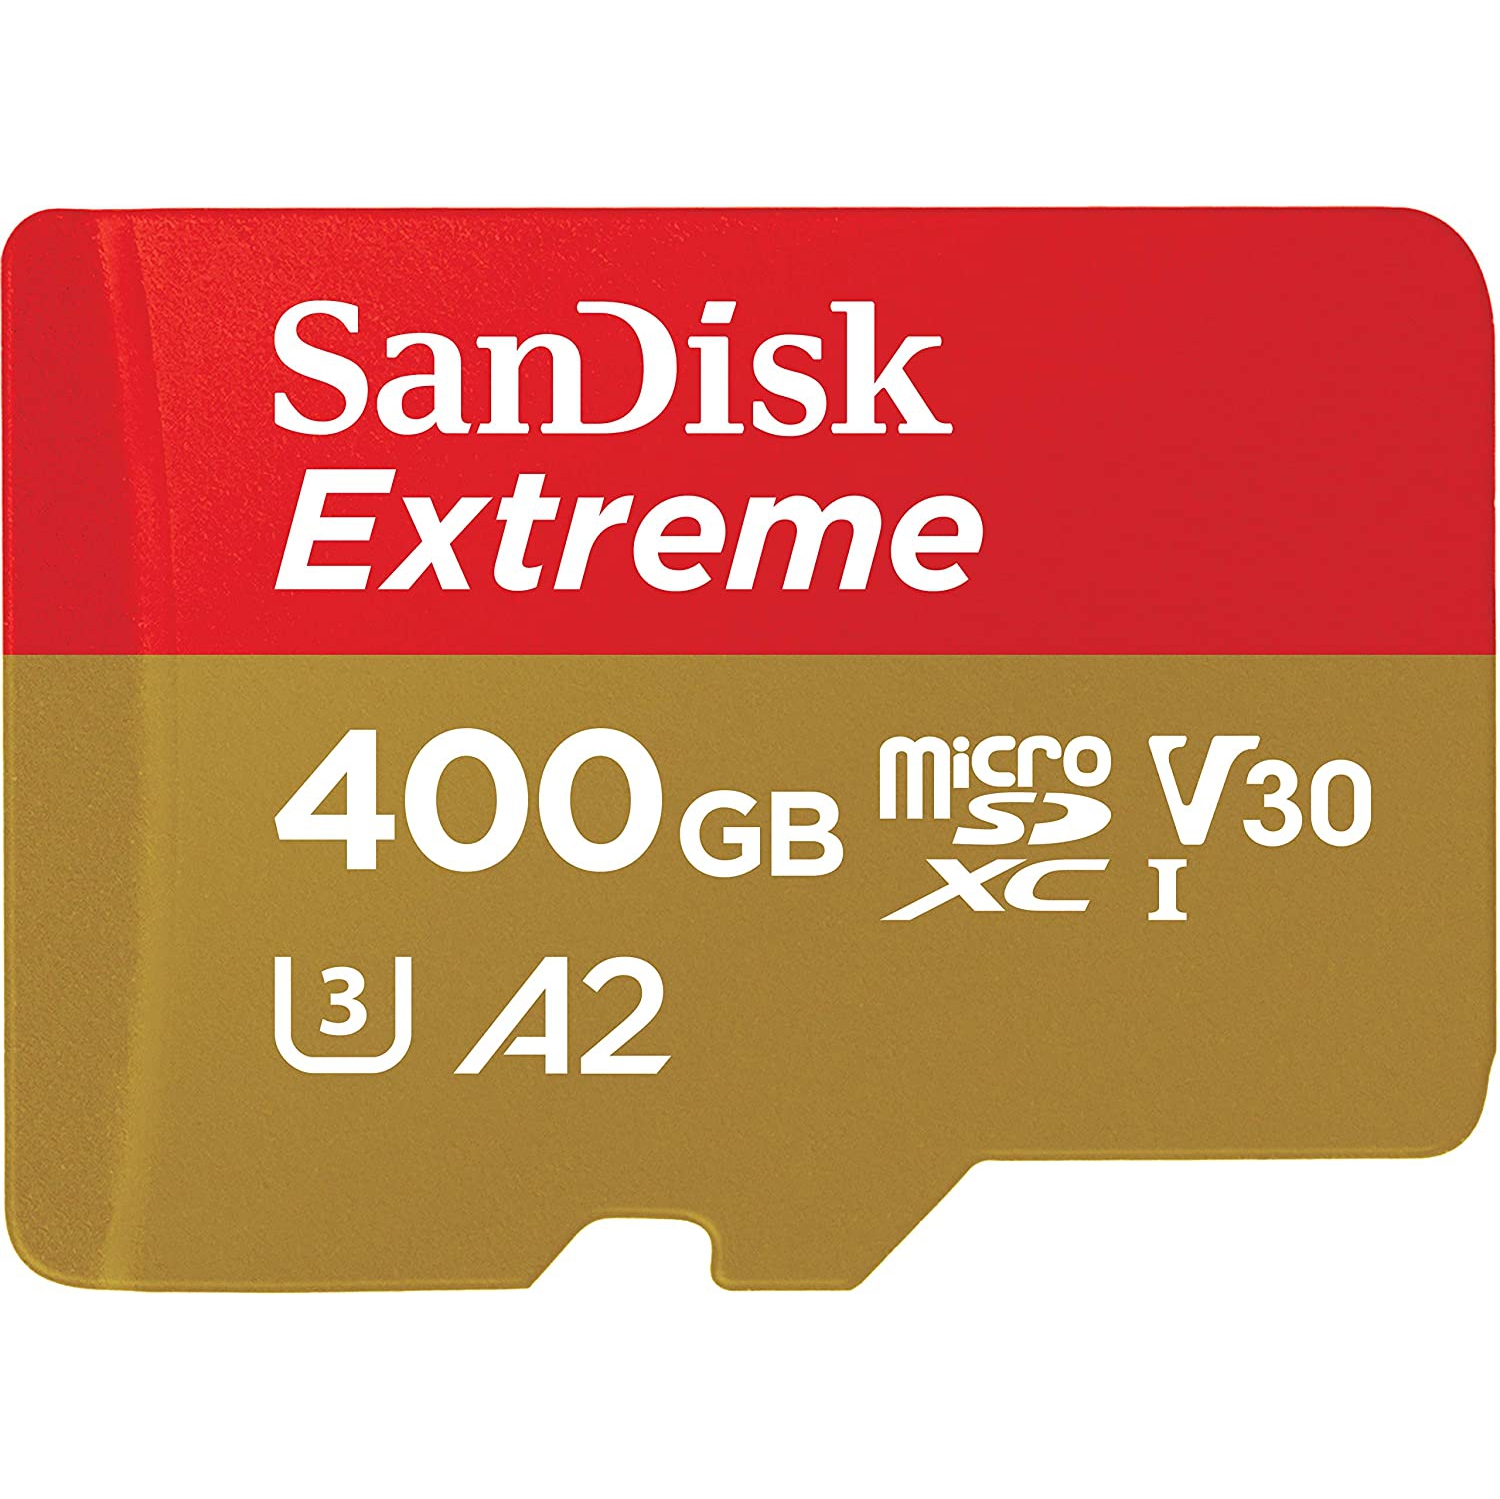 SanDisk Extreme 400GB C10 U3 V30 A2 Micro SD Card with Adapter SDSQXA1-400G